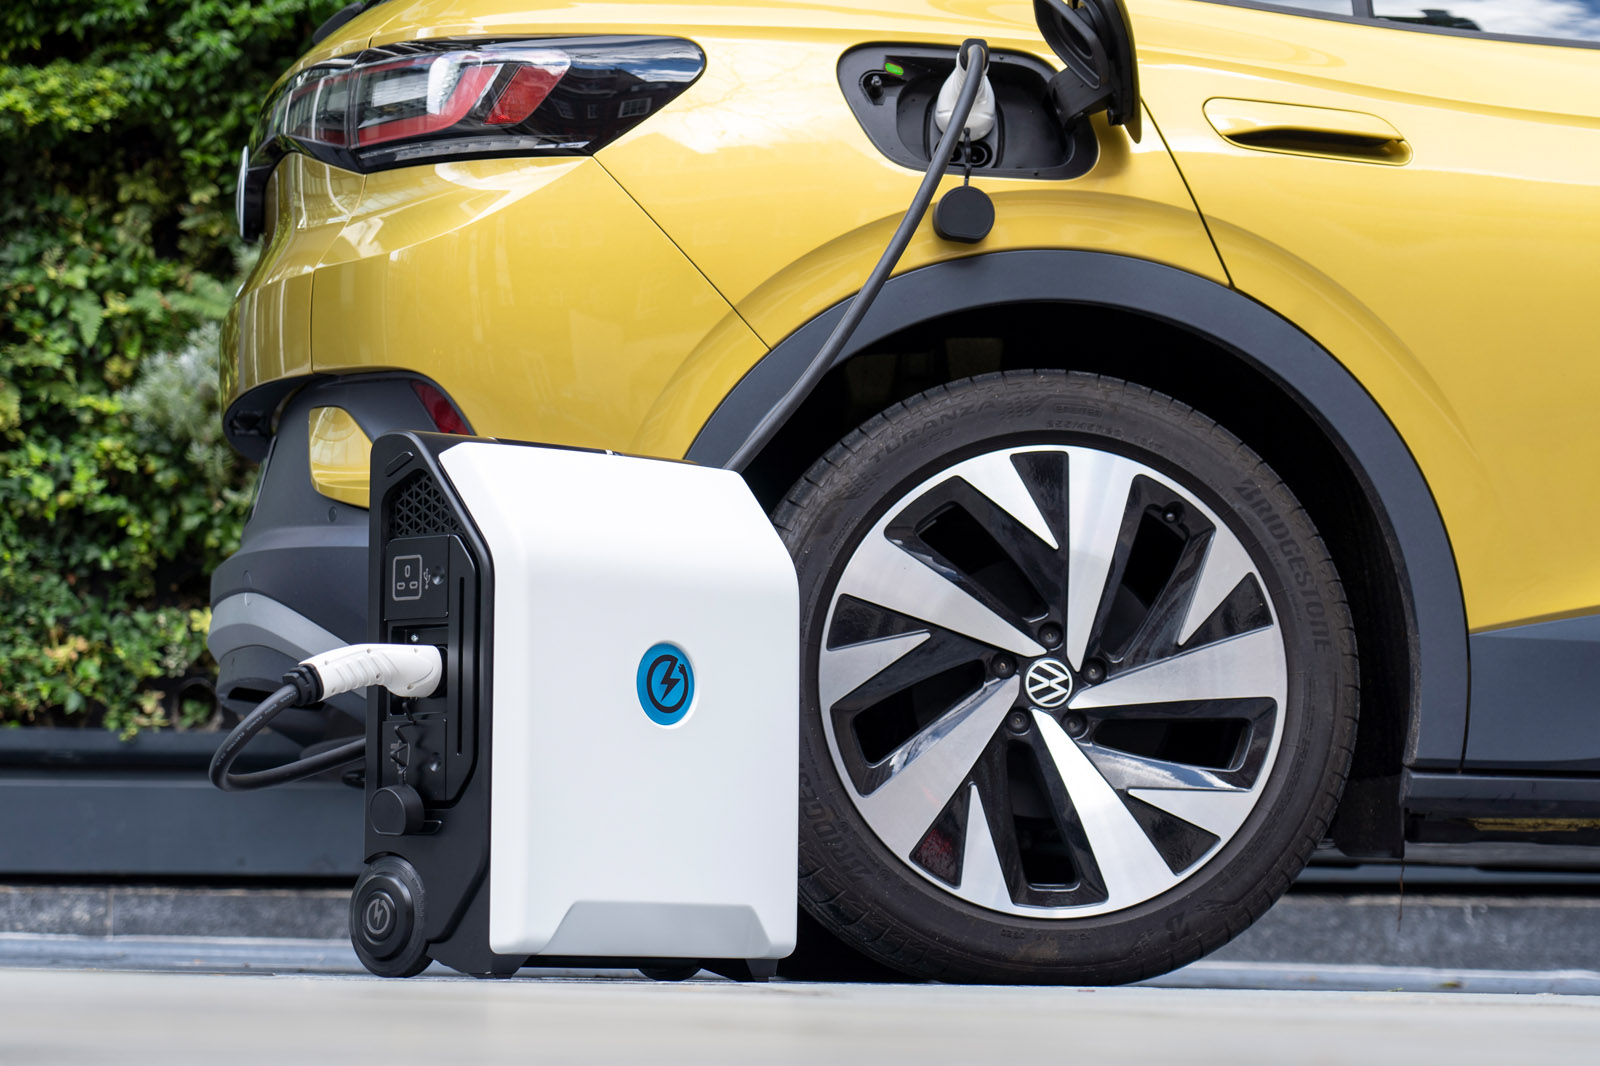 UK firm launches portable EV charger for urban drivers | Autocar